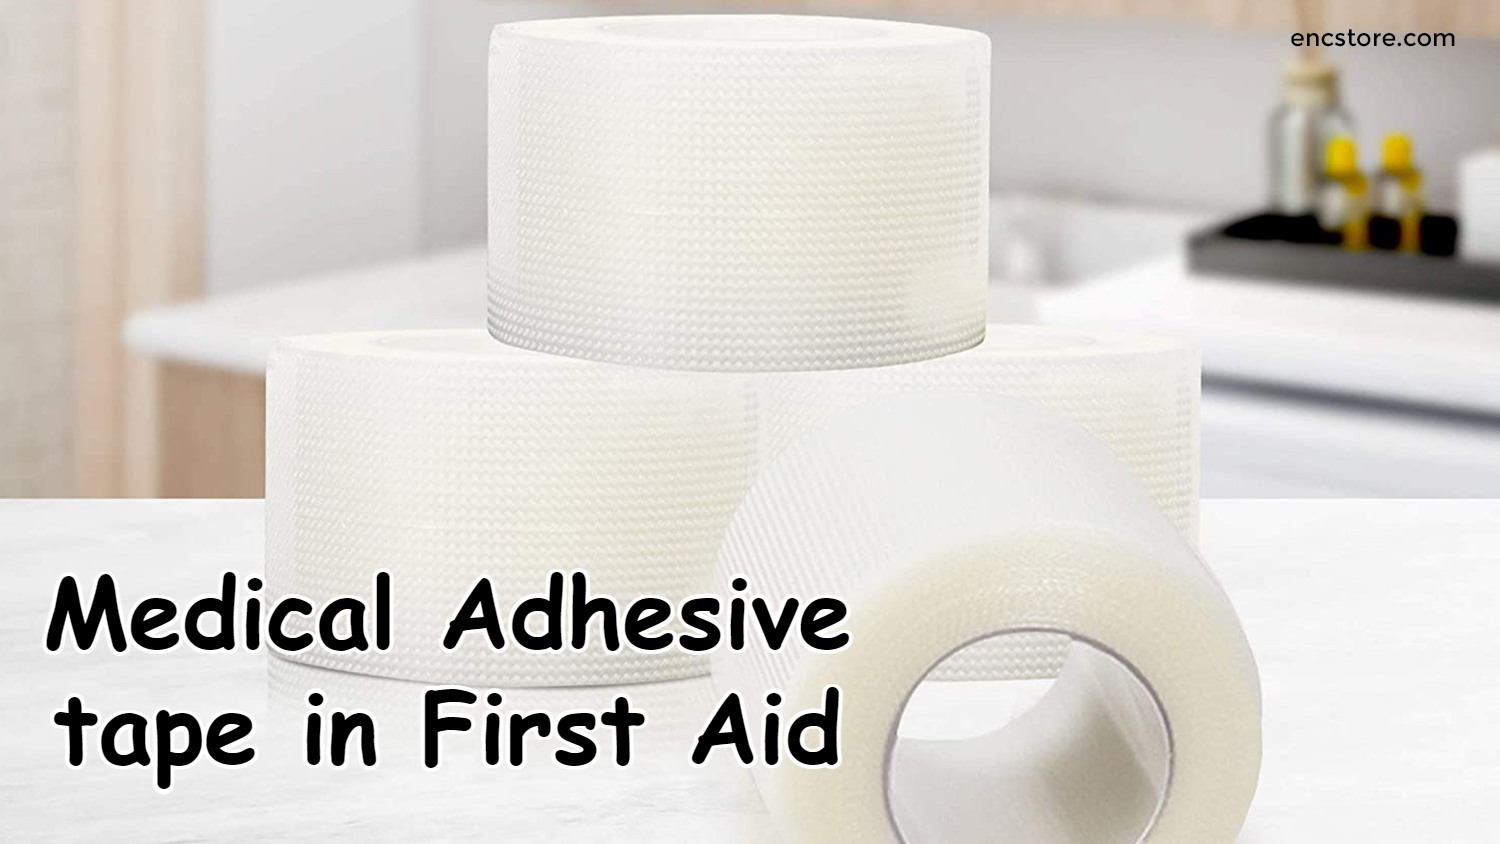 Introducing Self-Adhesive Textile tape and how to use it